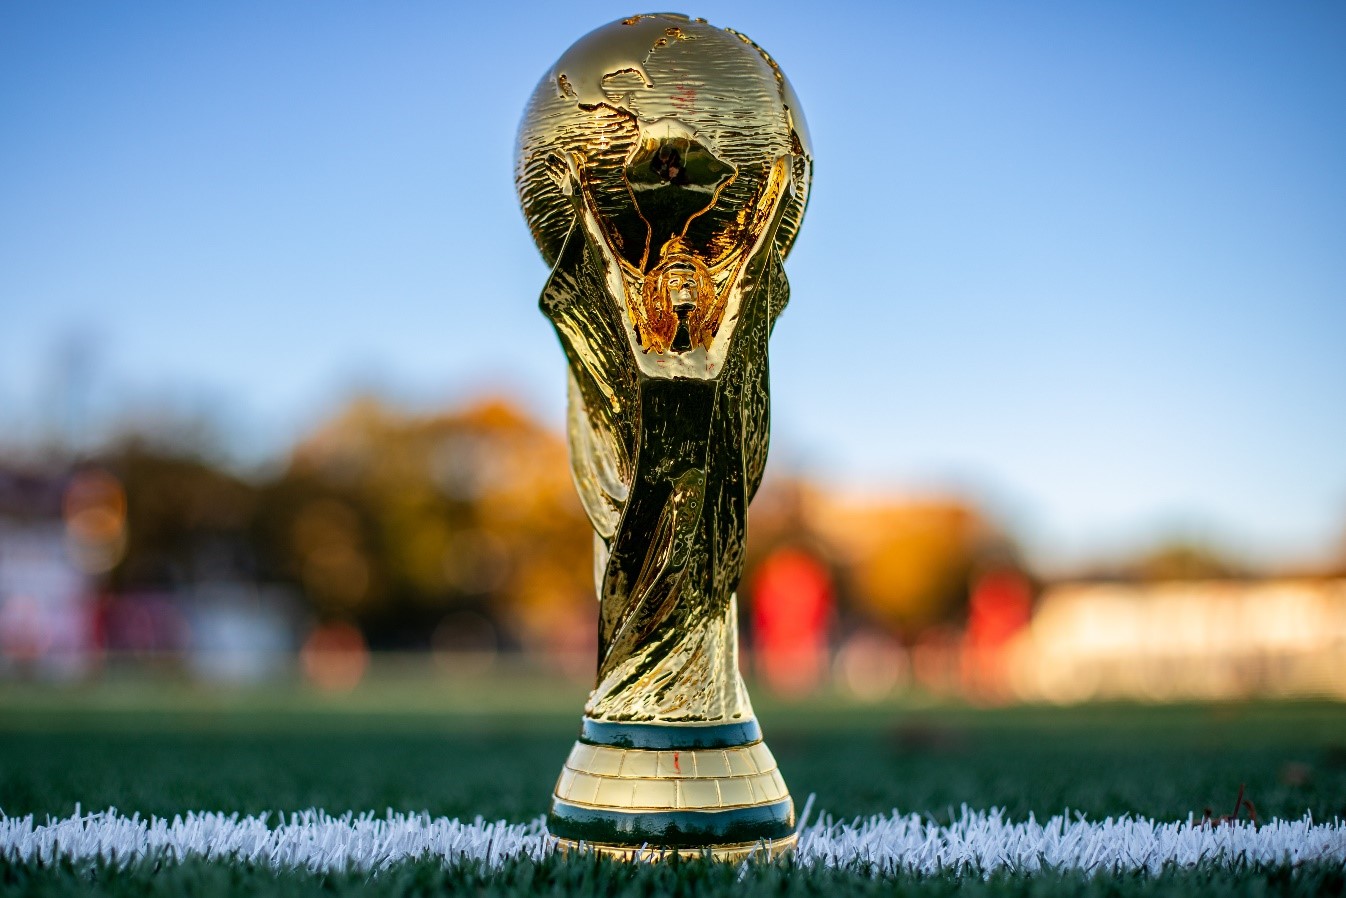 What are USA's chances in Group B at the 2022 Soccer World Cup